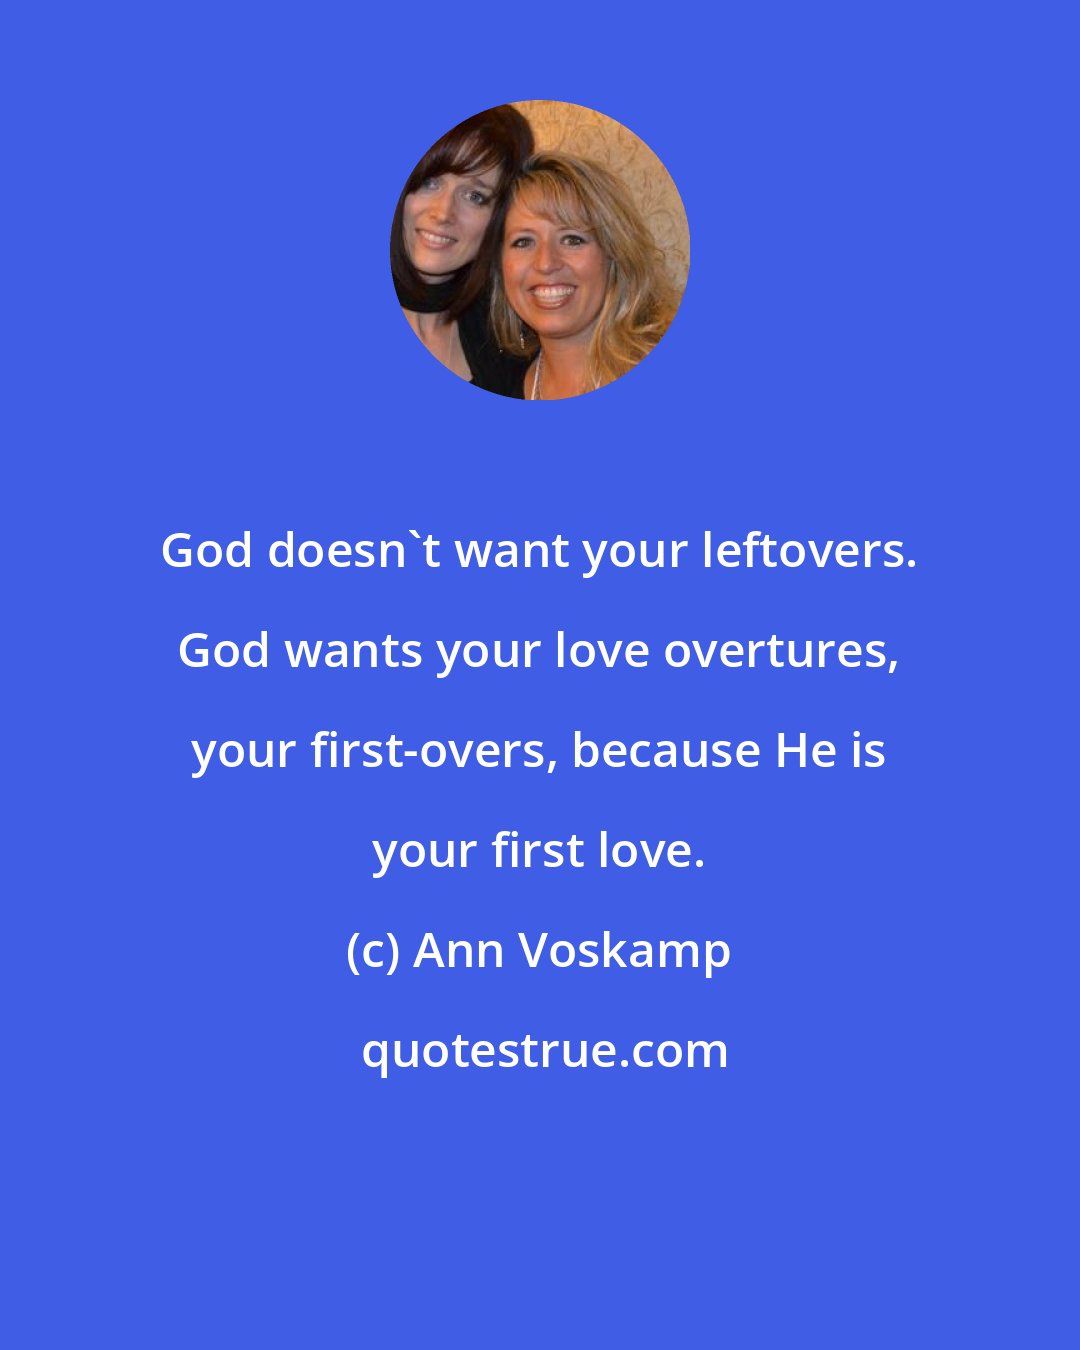 Ann Voskamp: God doesn't want your leftovers. God wants your love overtures, your first-overs, because He is your first love.